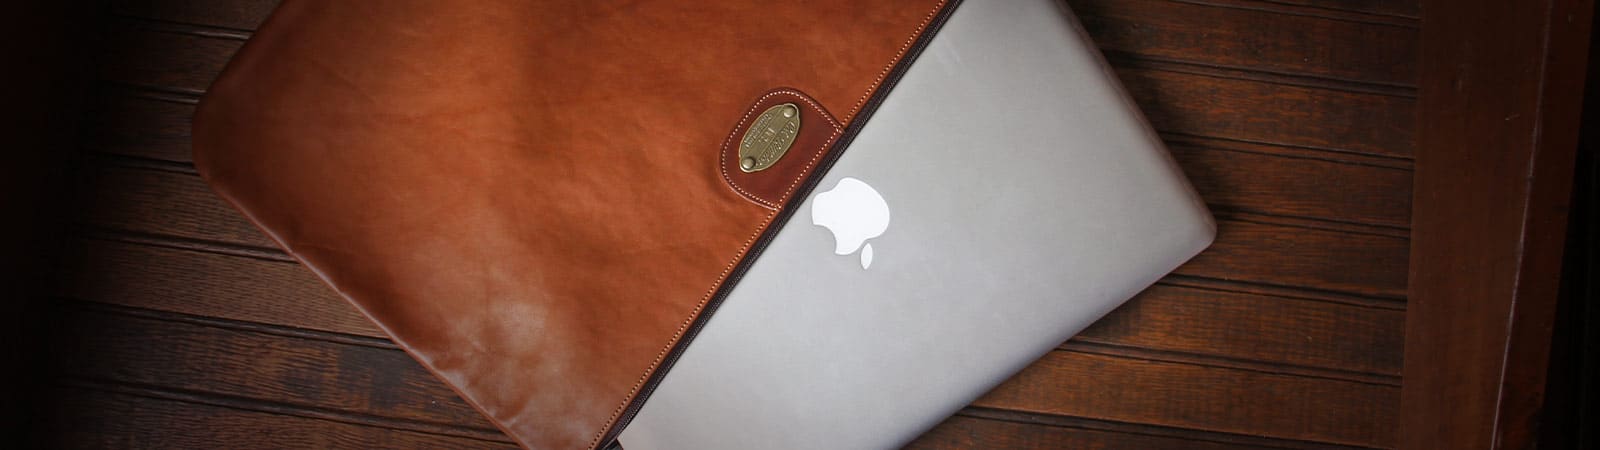 Laptop and iPad Category Header - MacBook laptop partially inside No. 3 Zip It leather pouch